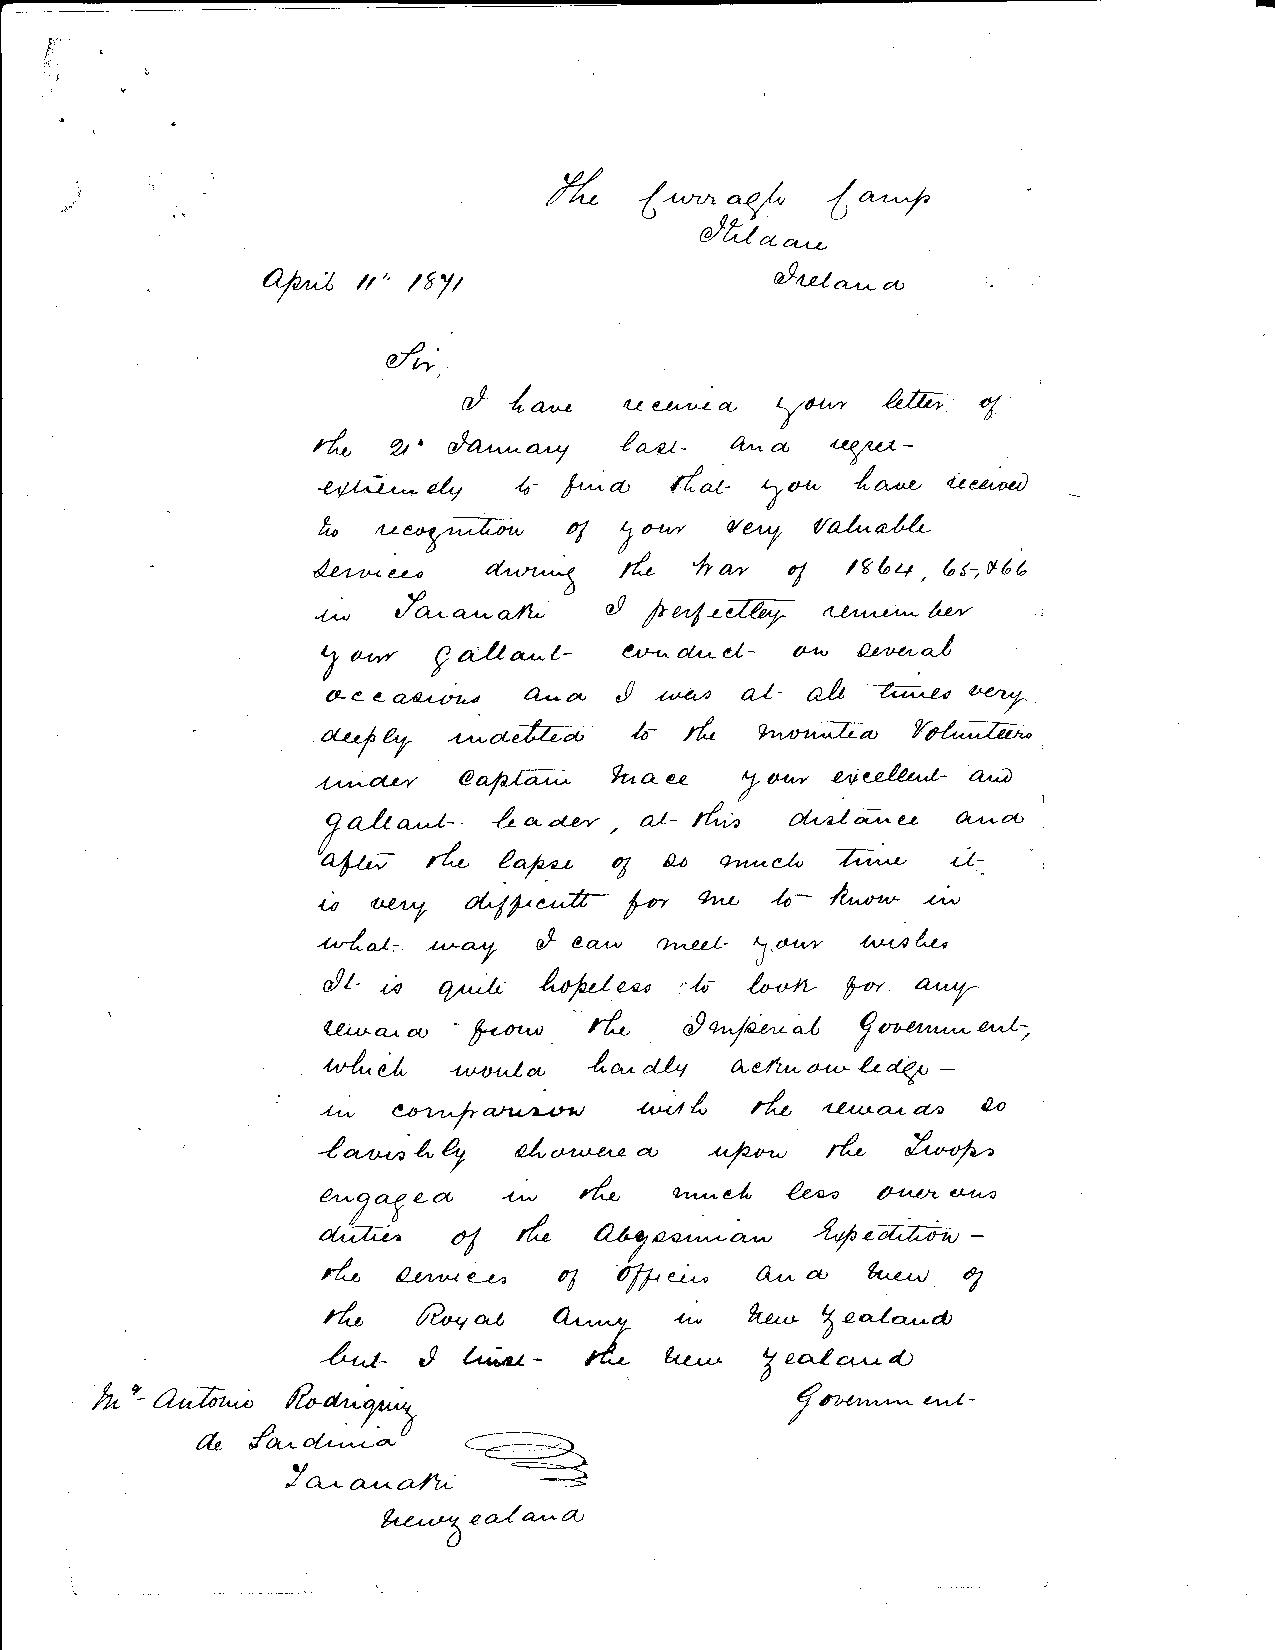 Letter from Colonel Henry Warre to Antonio Rodriquez, April 11 1871; National Archives, Wellington, New Zealand